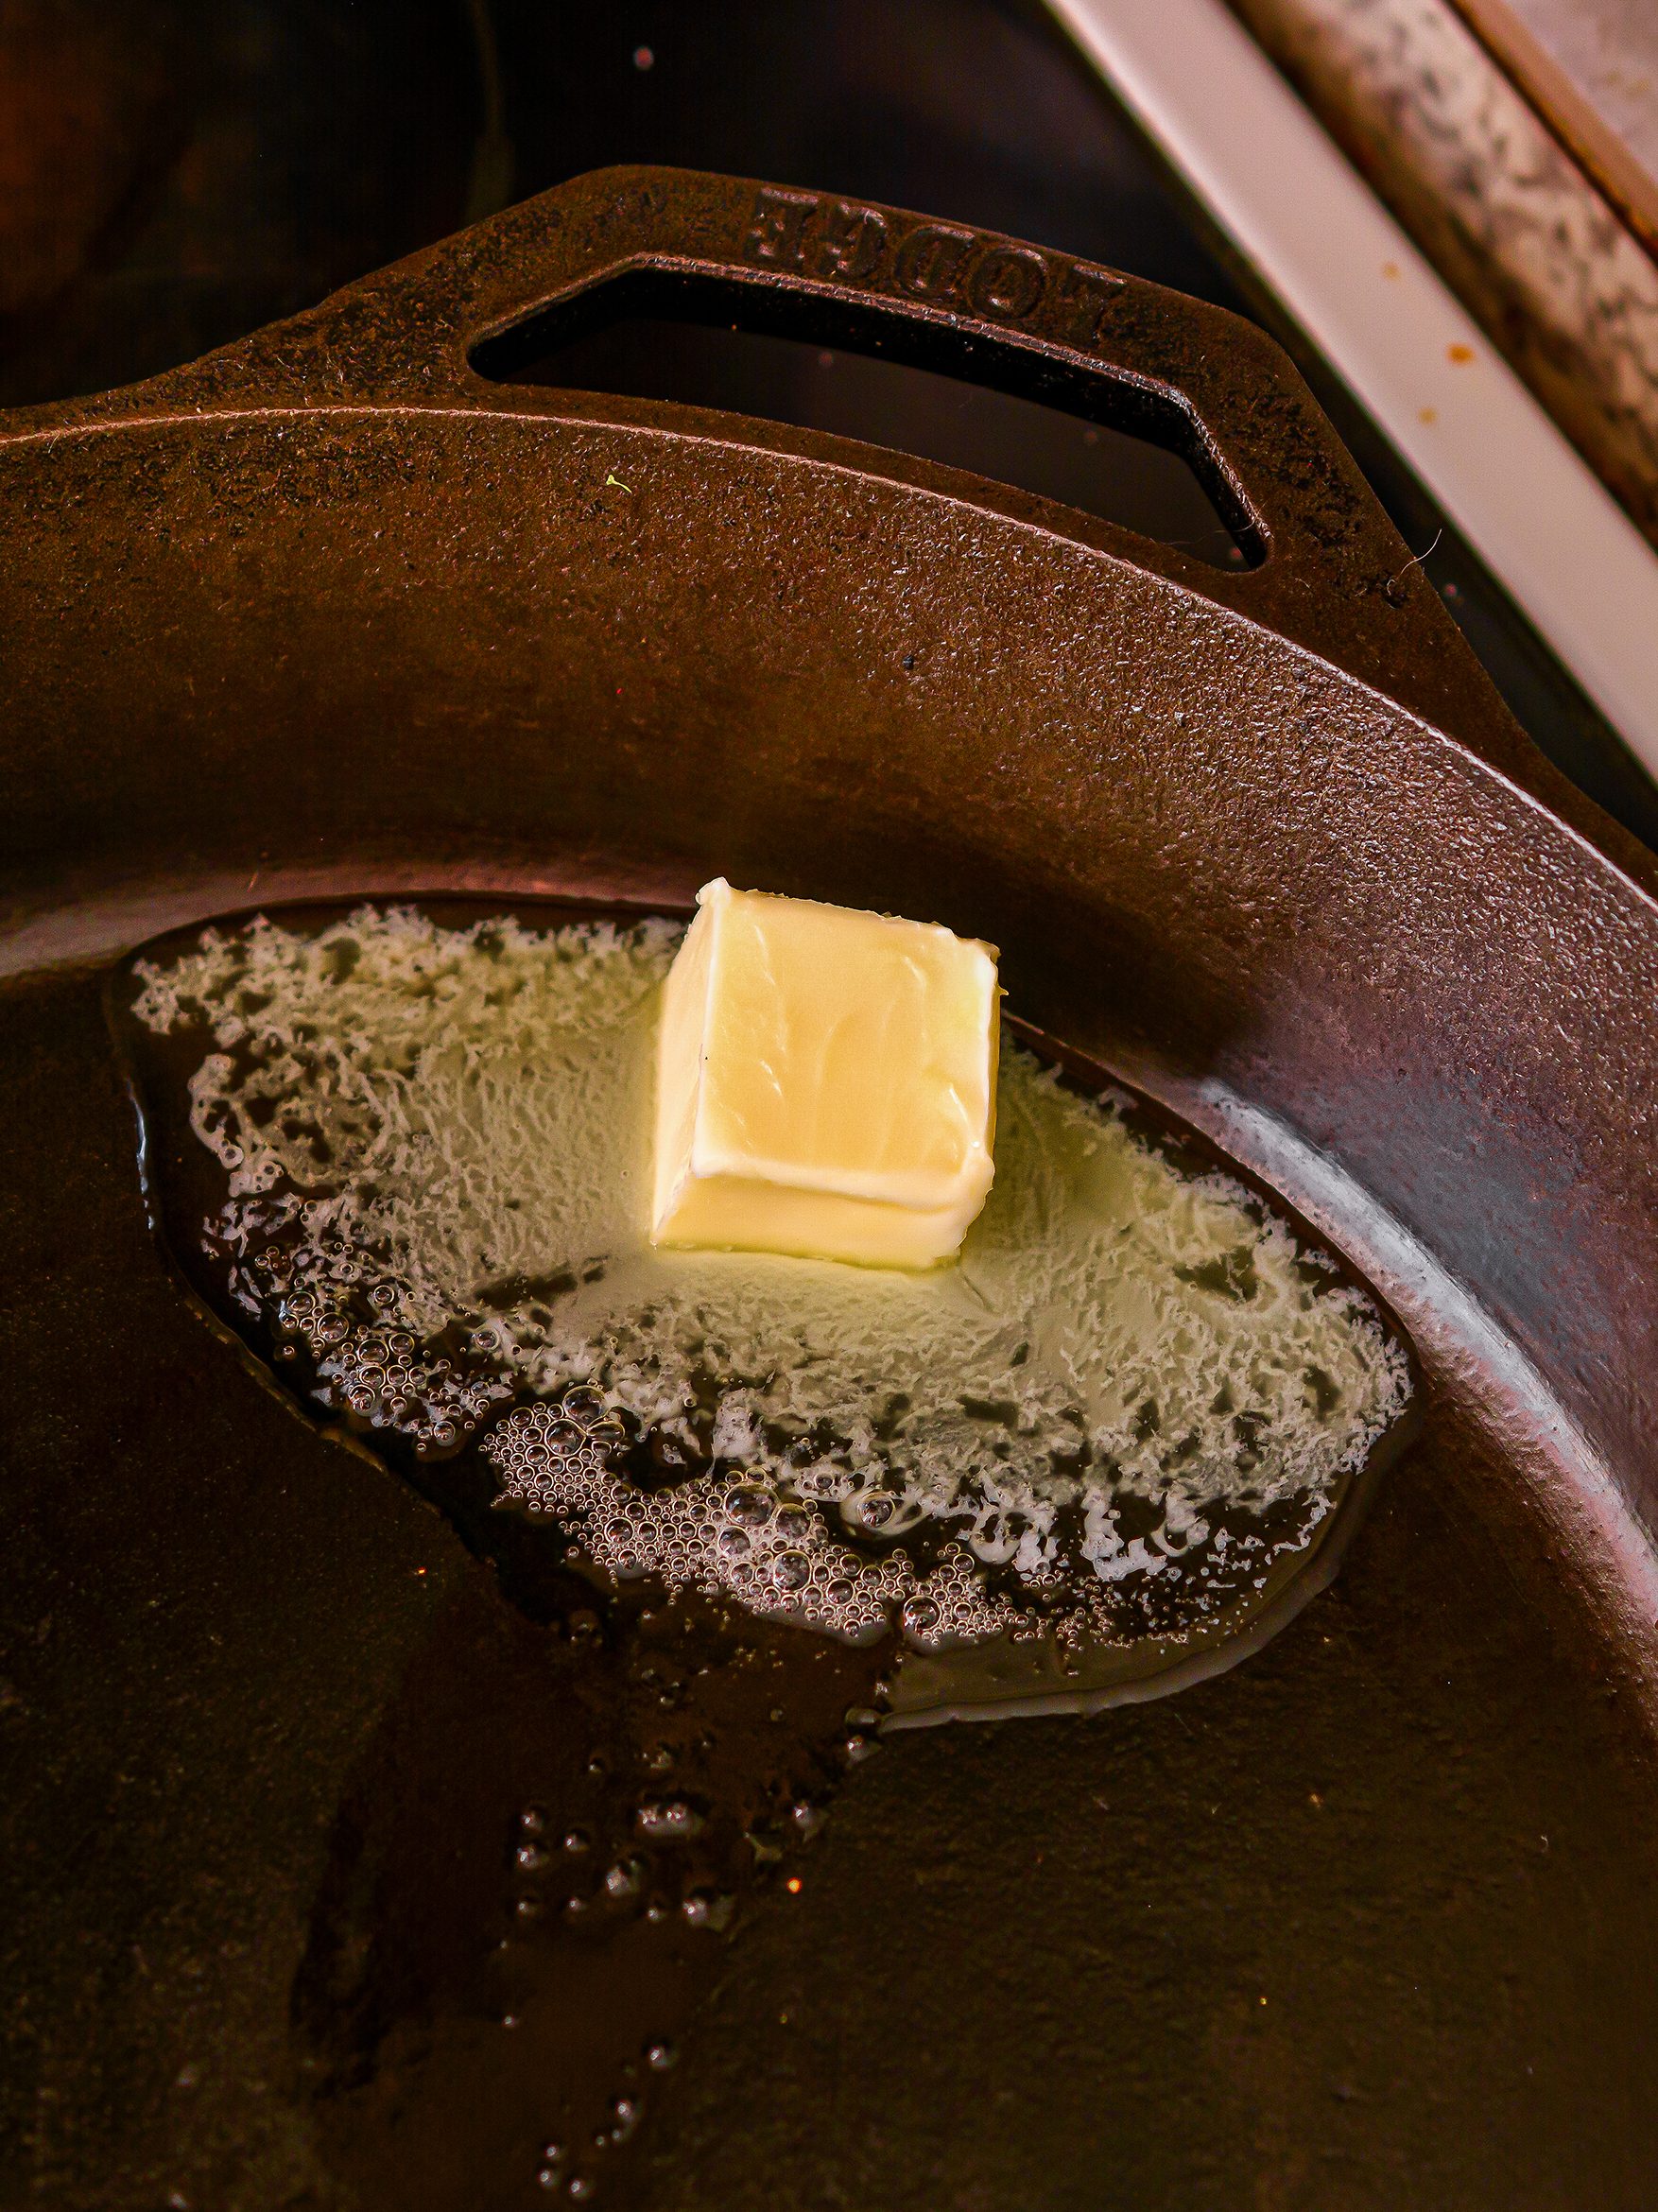 Place 2 Tbsp of the butter in a skillet over medium high heat.